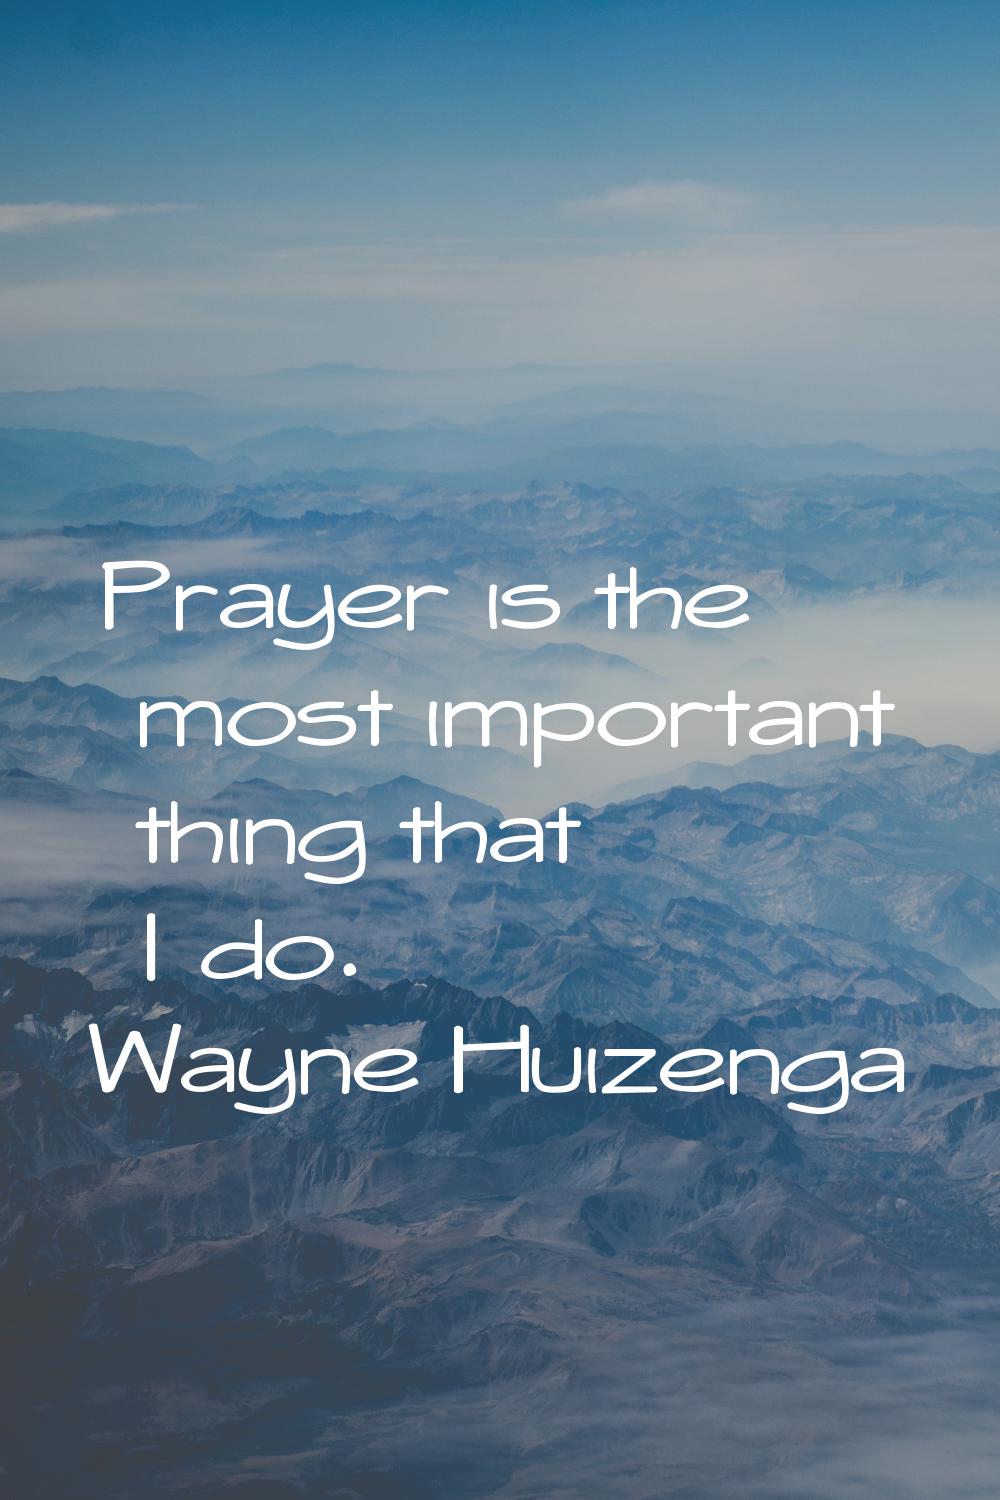 Prayer is the most important thing that I do.